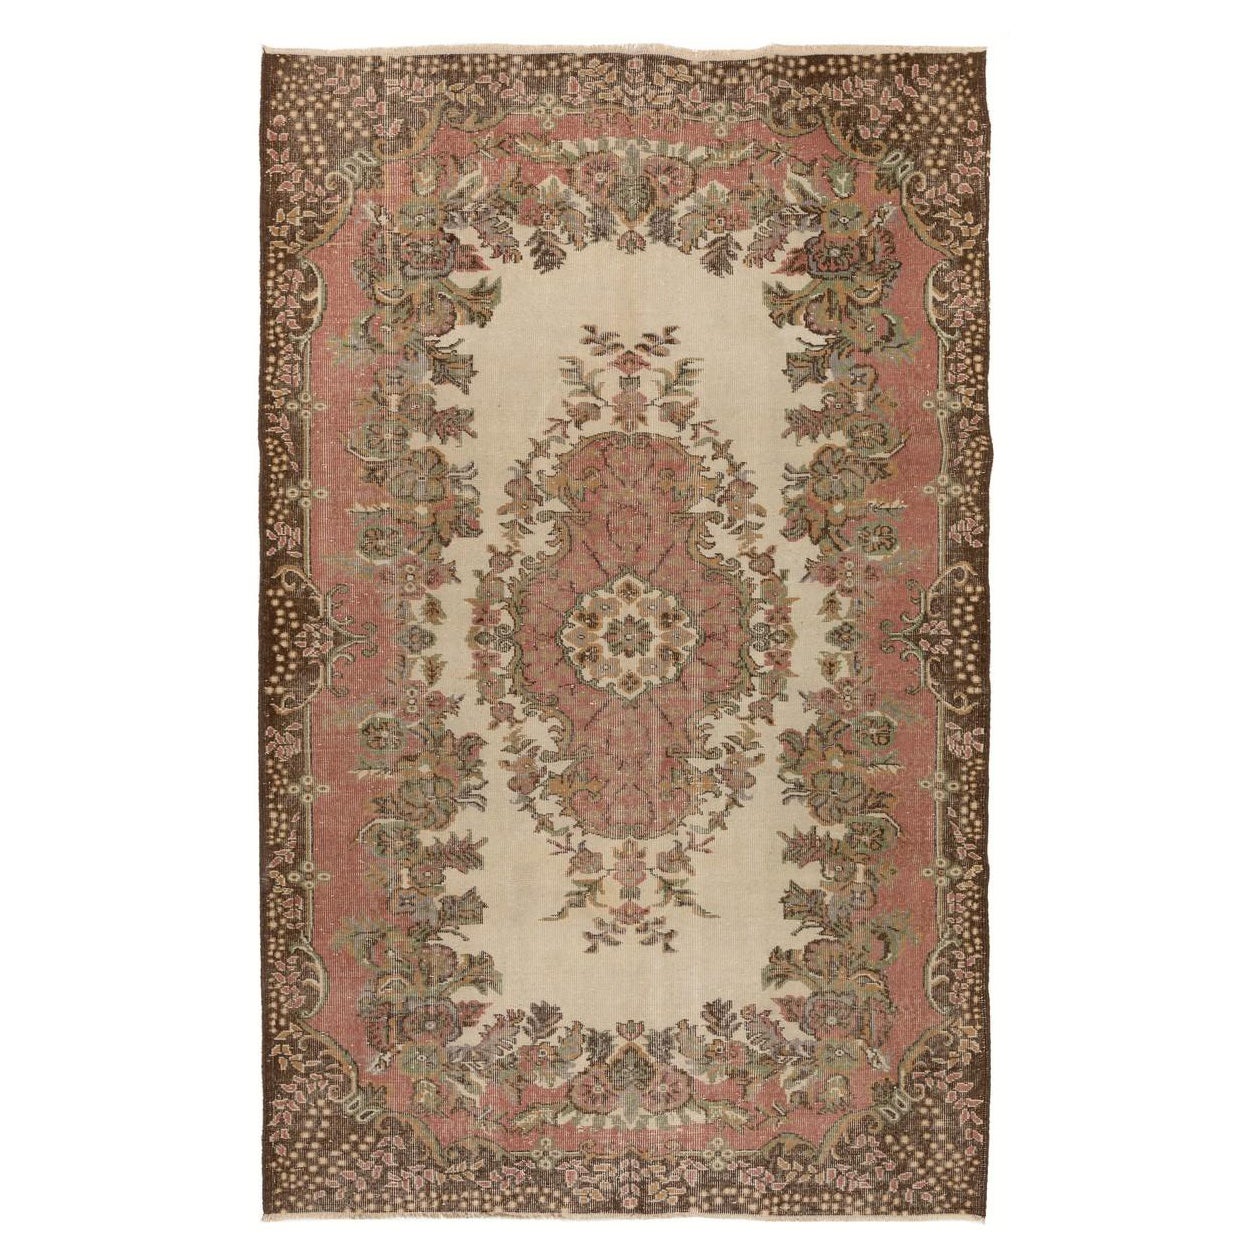 6x9 Ft Authentic Hand-Knotted Vintage Anatolian Area Rug with Baroque Design For Sale